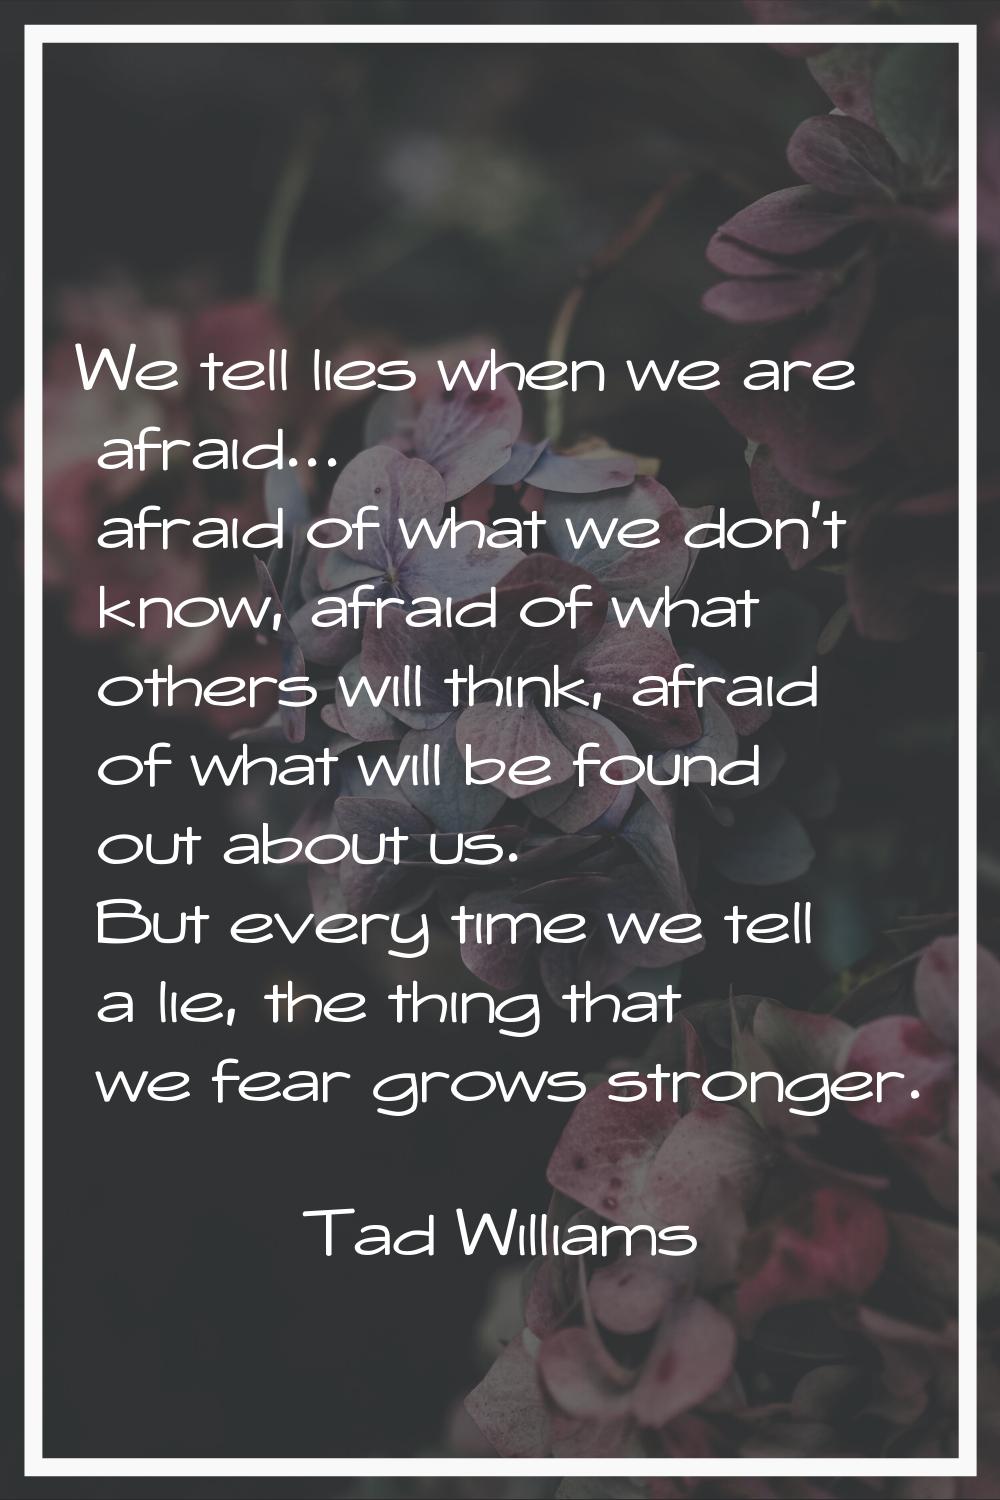 We tell lies when we are afraid... afraid of what we don't know, afraid of what others will think, 